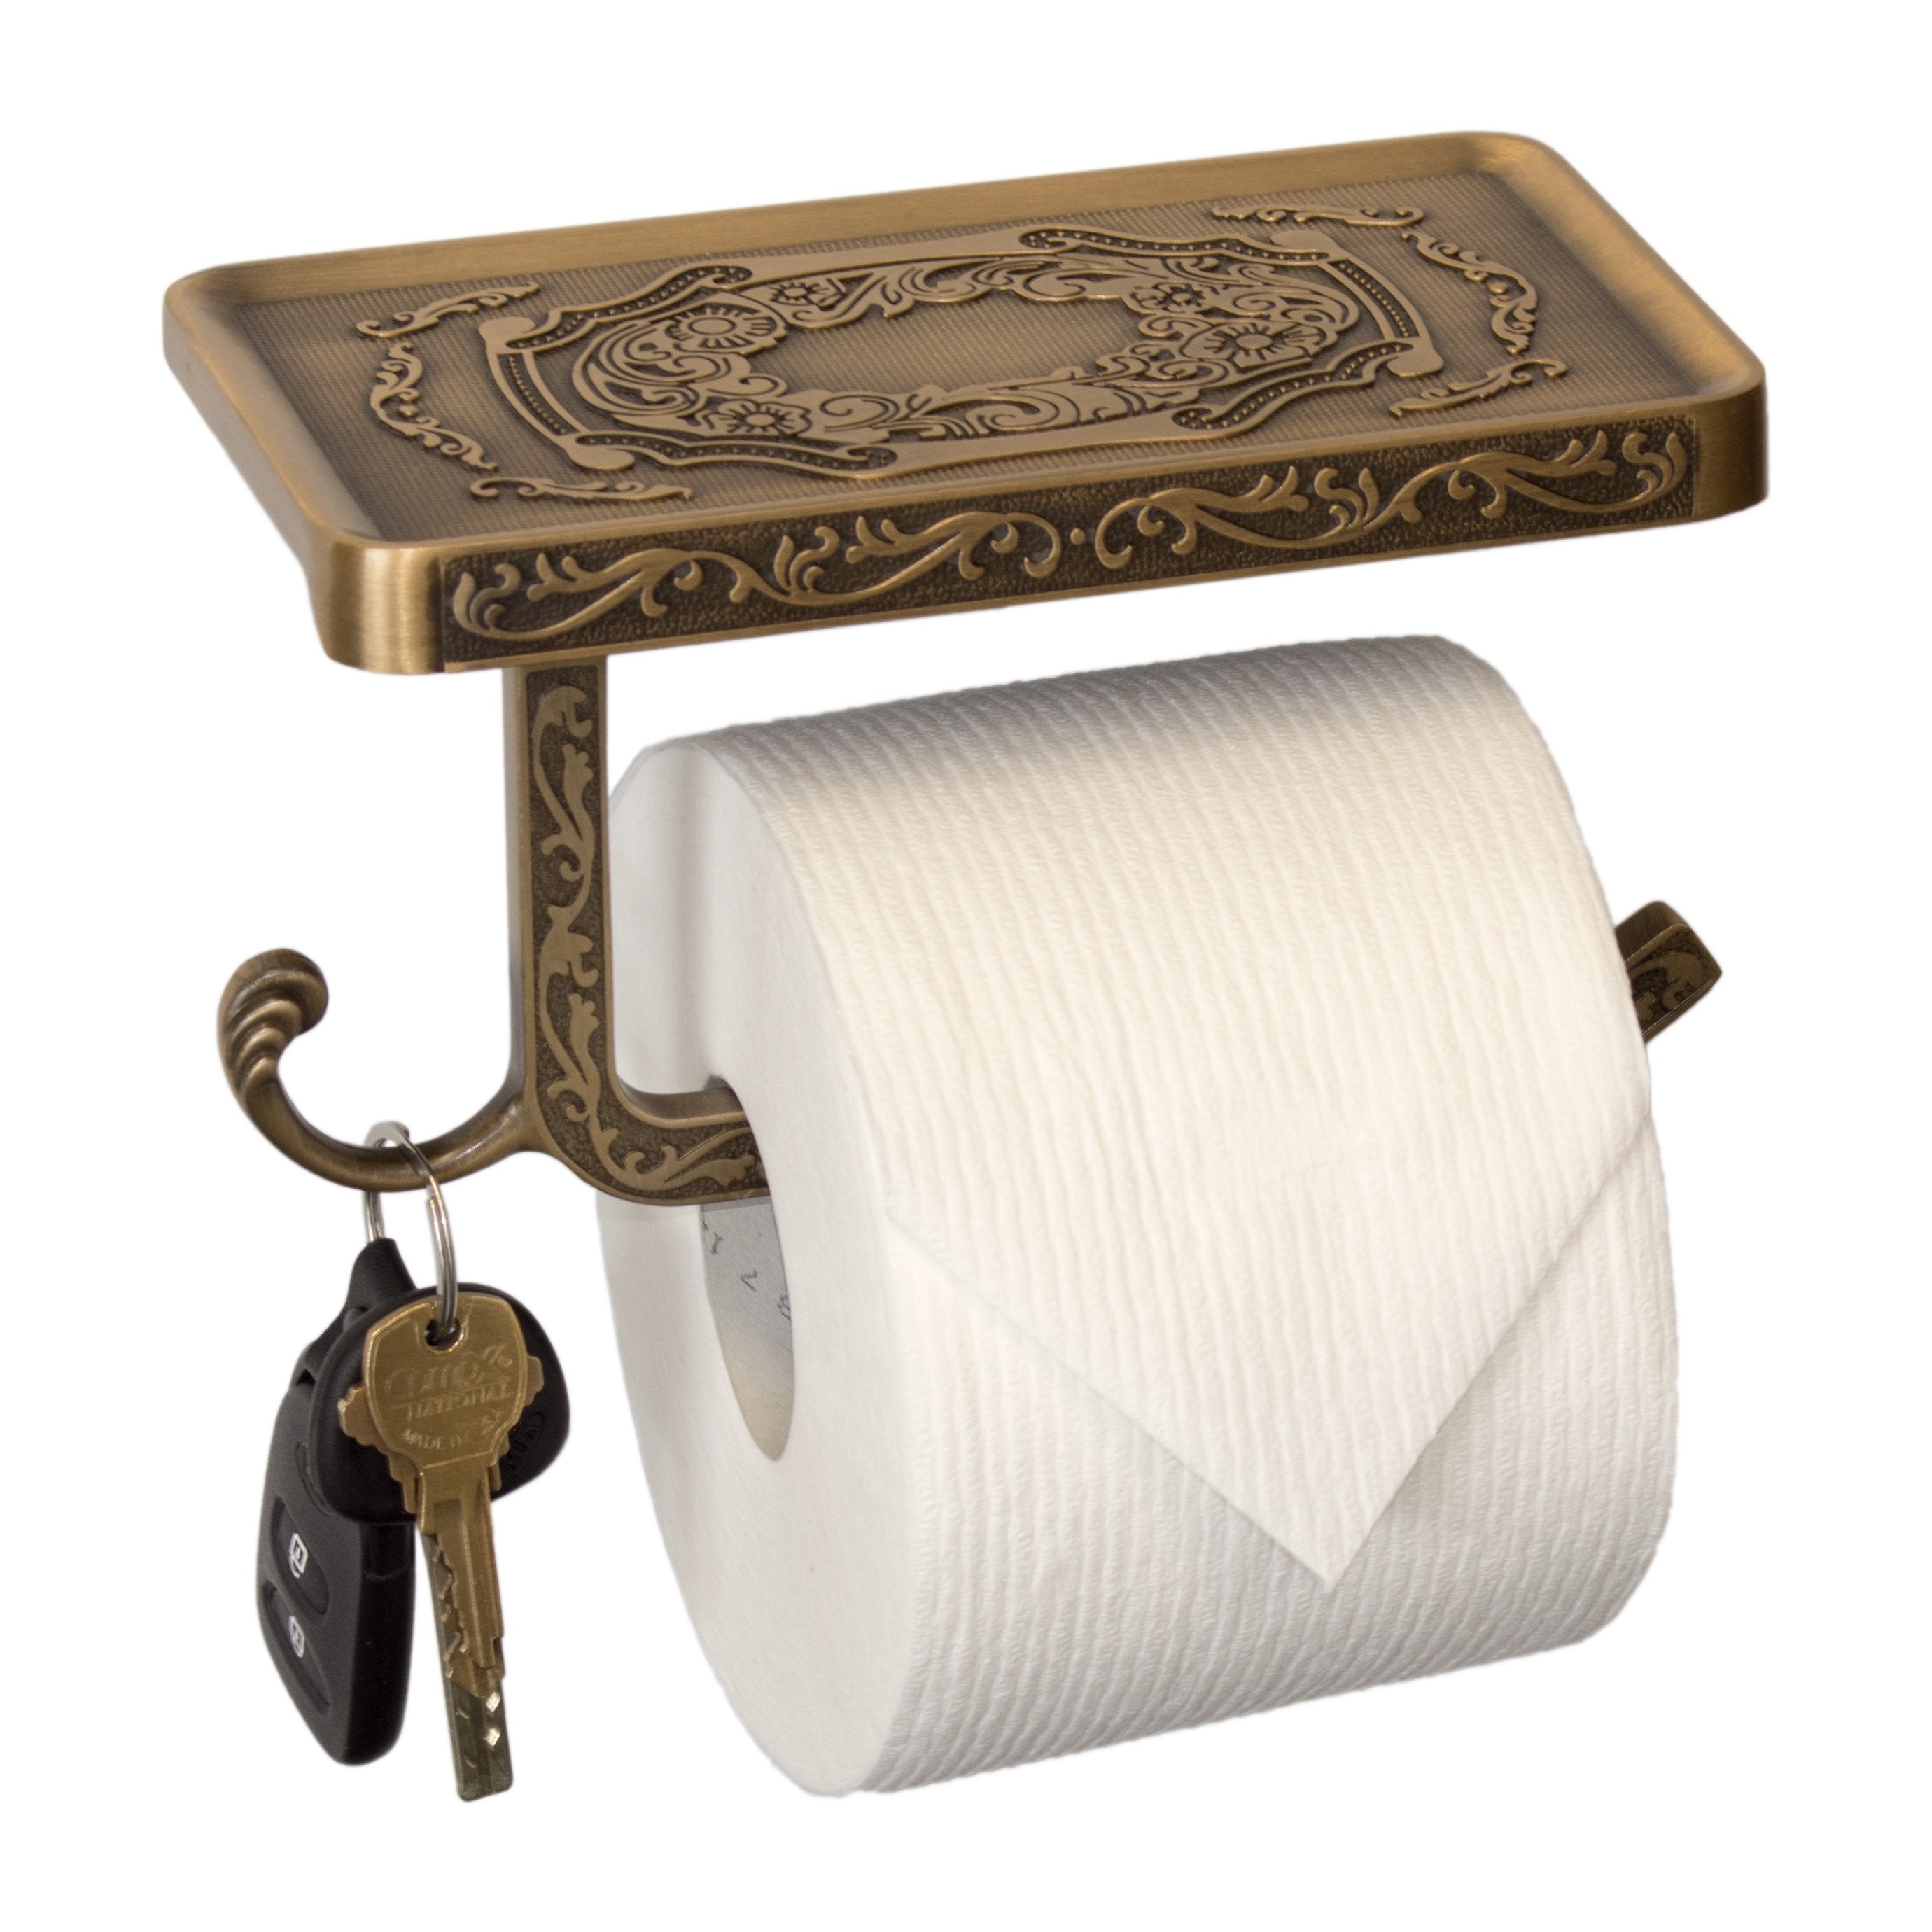 Neater Nest Reversible Toilet Paper Holder with Phone Shelf and Bathroom Hook, Vintage Decor Style (Oil Rubbed Bronze)